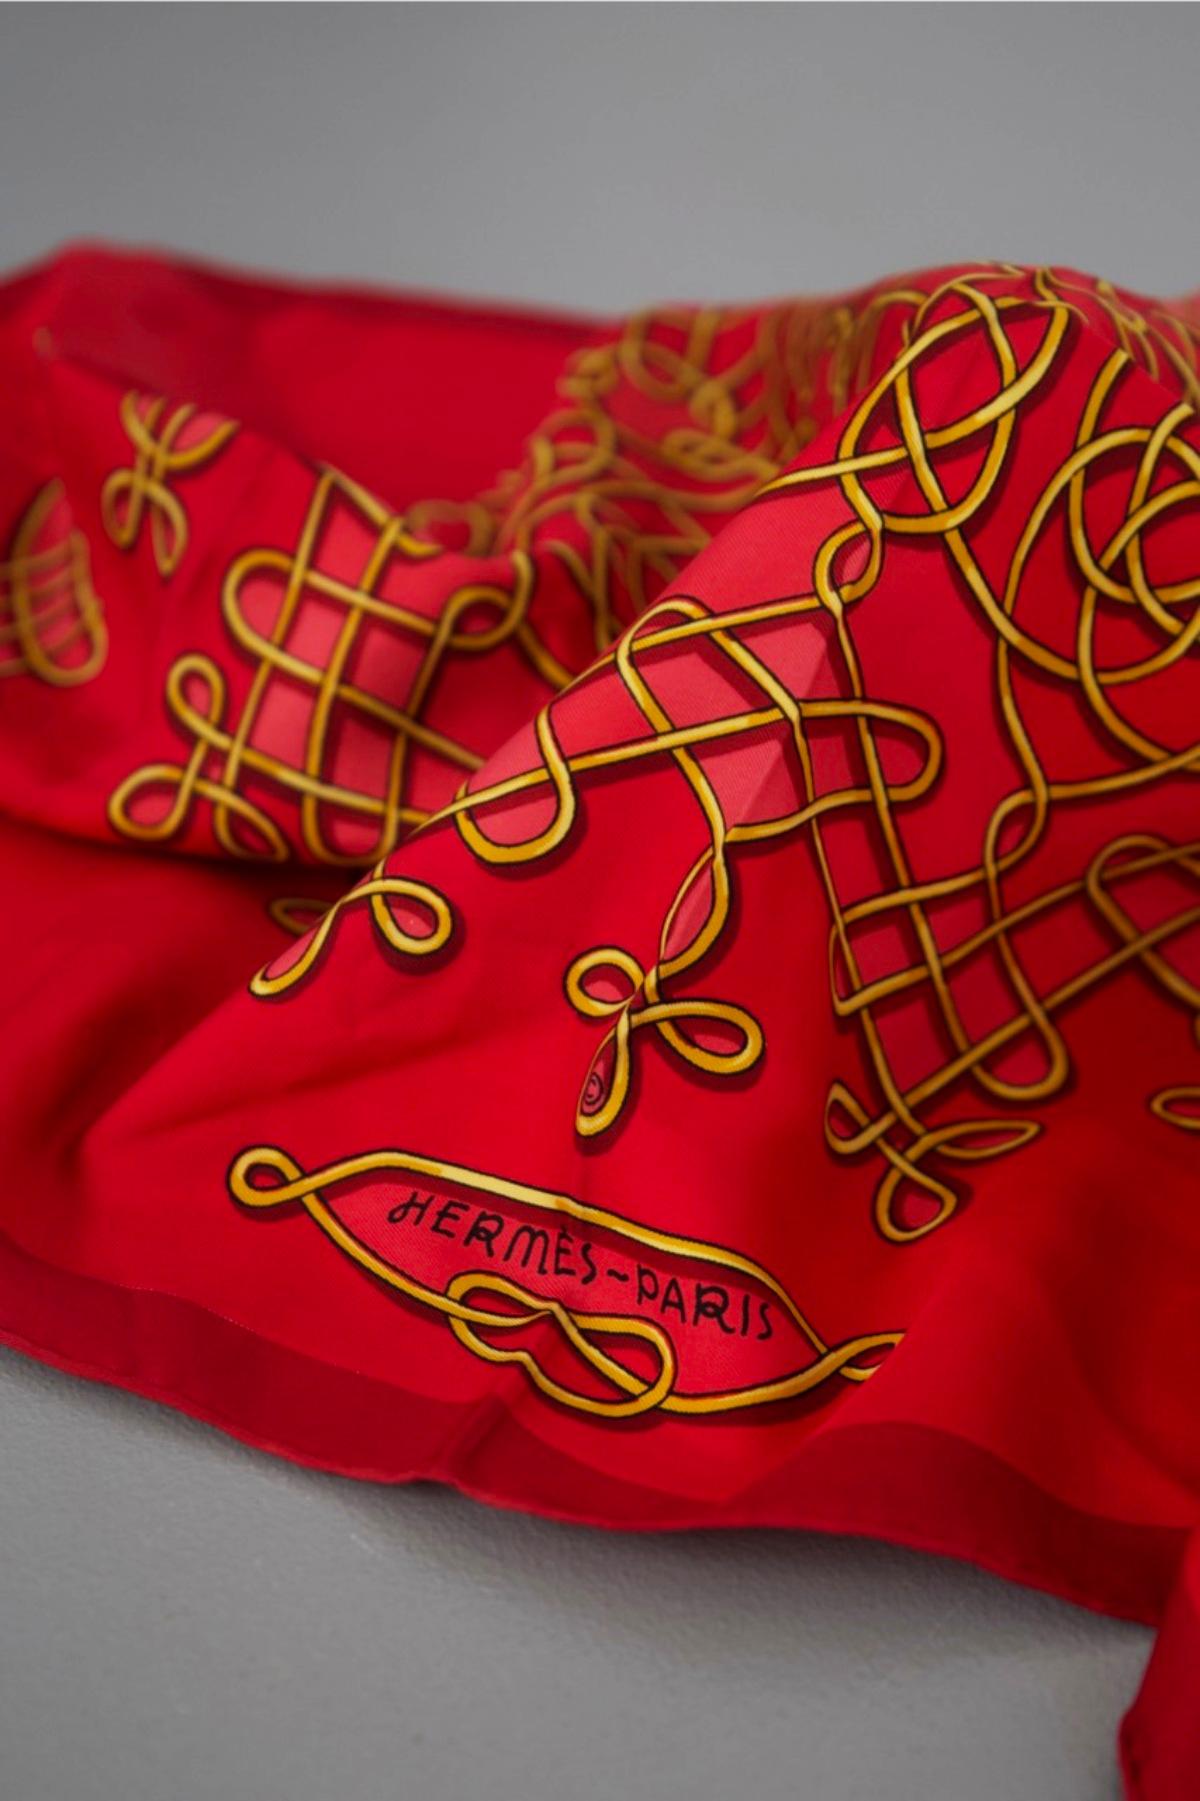 Gorgeous Hermès scarf designed in the 1990s.
The scarf is entirely made ion red silk with gold designs, very beautiful and elegant.
It depicts a very sinuous Greek fret that winds and knots mixing red and gold, in an absolutely classic and